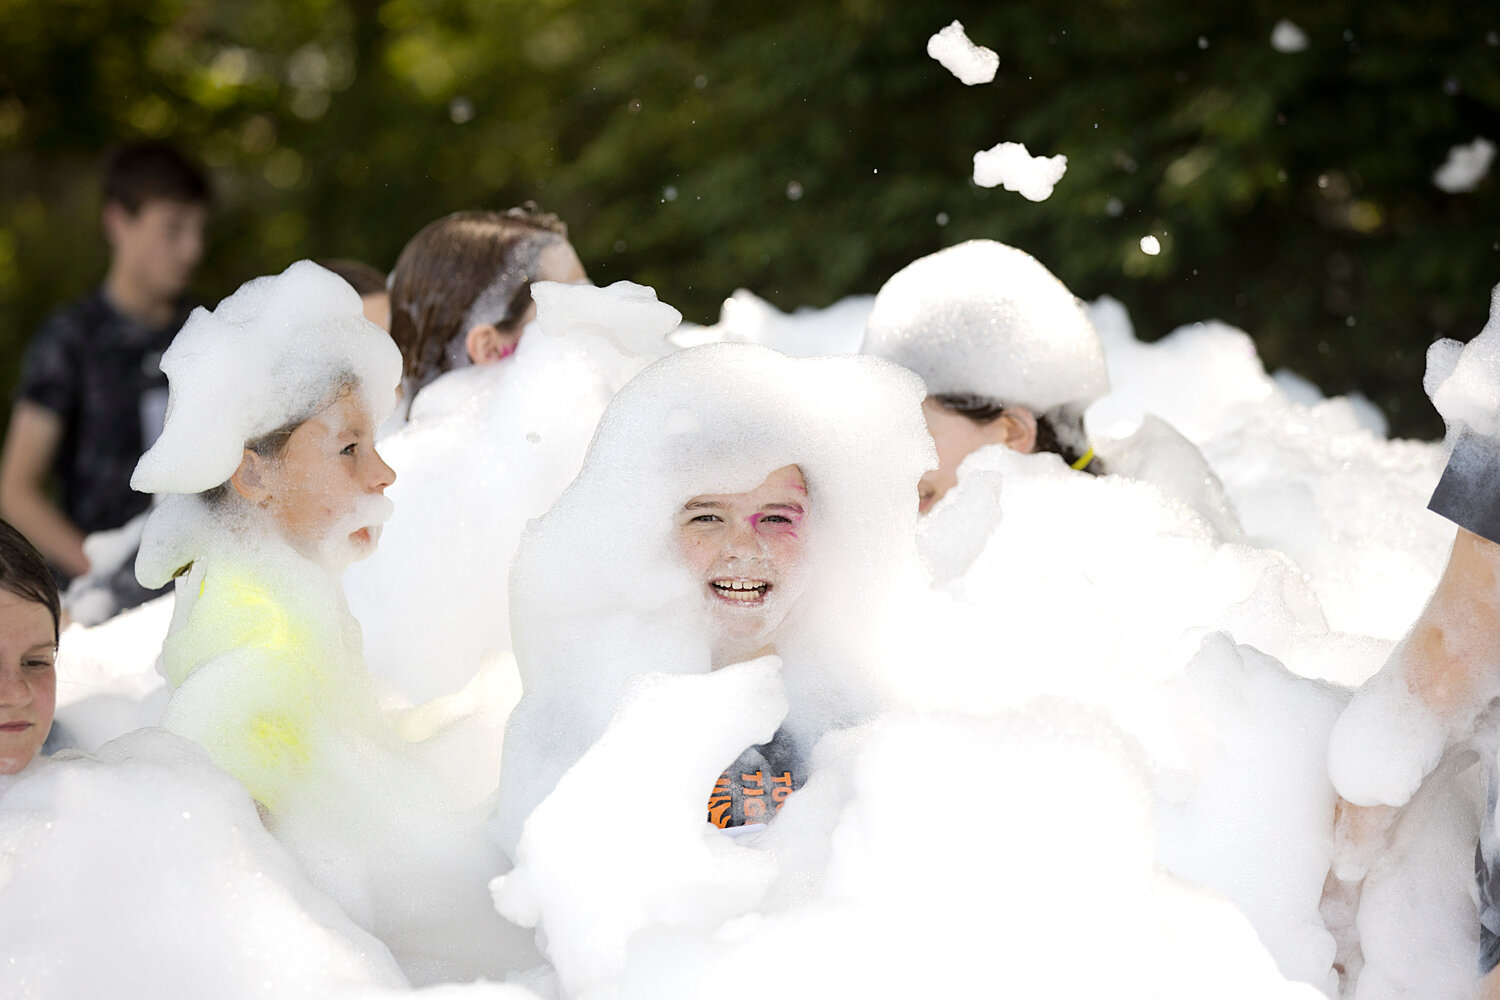 The bubble pit obstacle proved to be the most popular among children participating in Hampden Meadow's "Tough Tiger" event, Sunday.